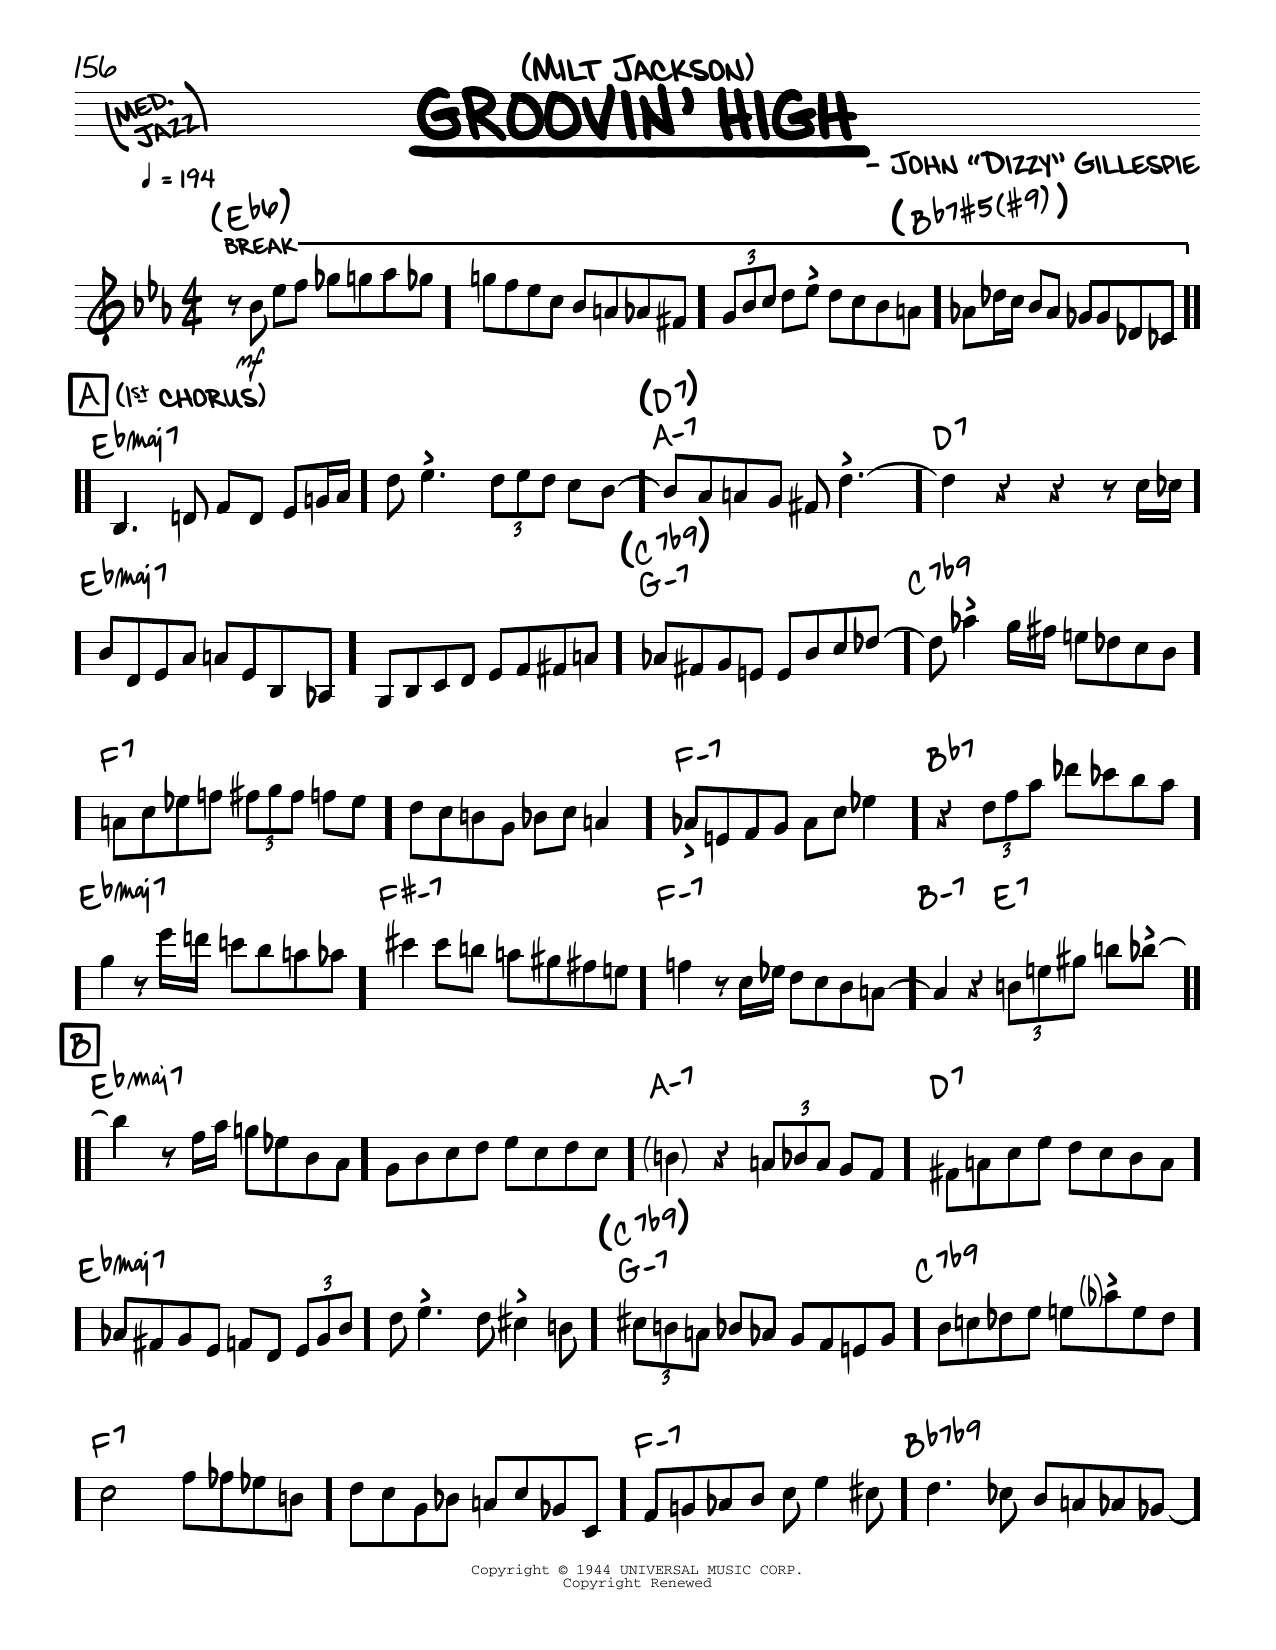 Download Milt Jackson Groovin' High (solo only) Sheet Music